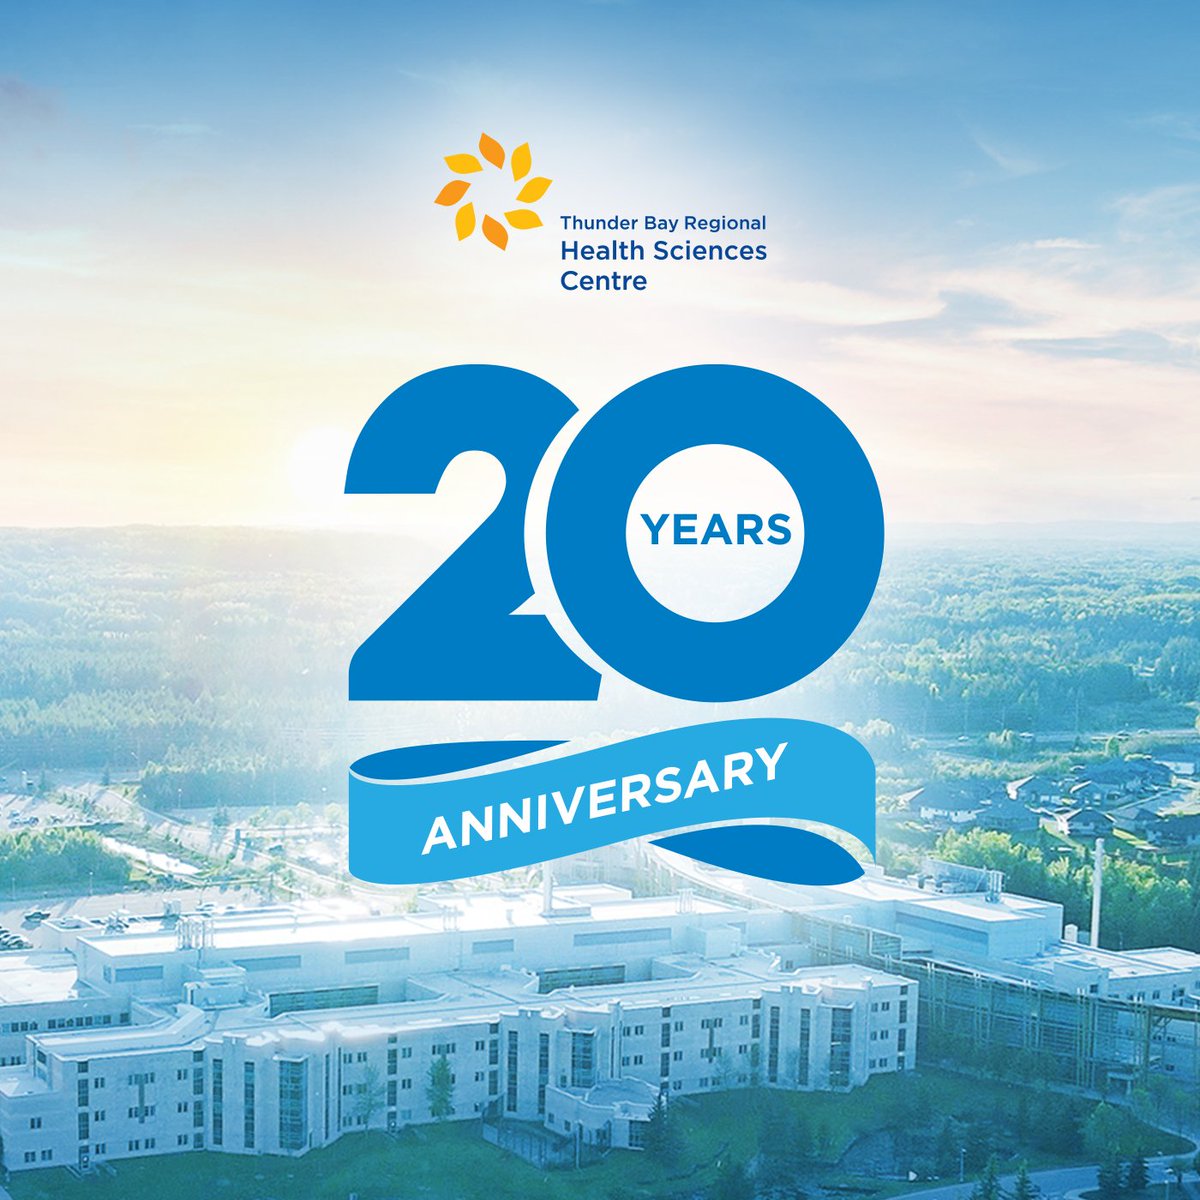 We're celebrating 20 years of Thunder Bay Regional Health Sciences Centre (#TBRHSC). Throughout the year, we'll be taking a trip down memory lane to revisit some of our most significant milestones. ⬇️